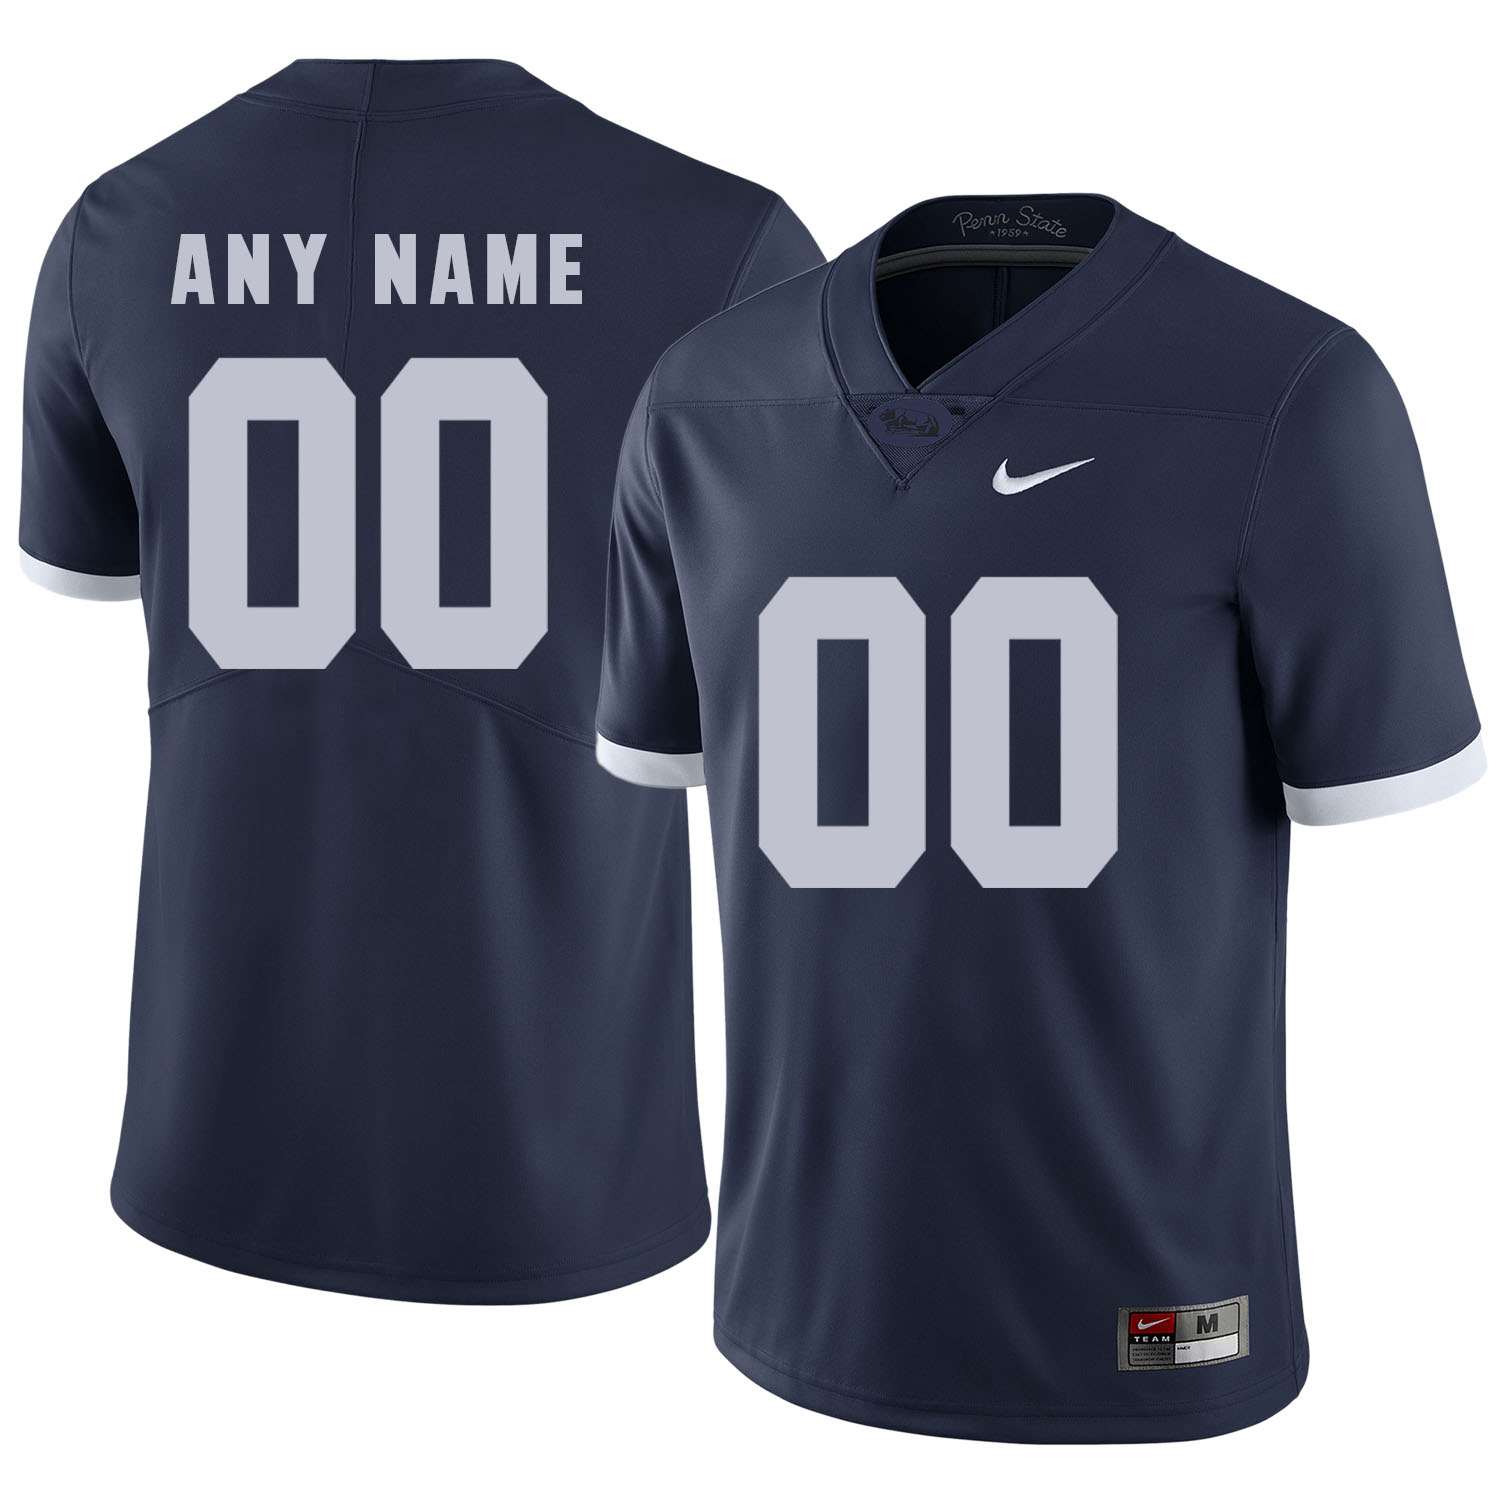 Penn State Nittany Lions Navy Men's Customized College Football Jersey